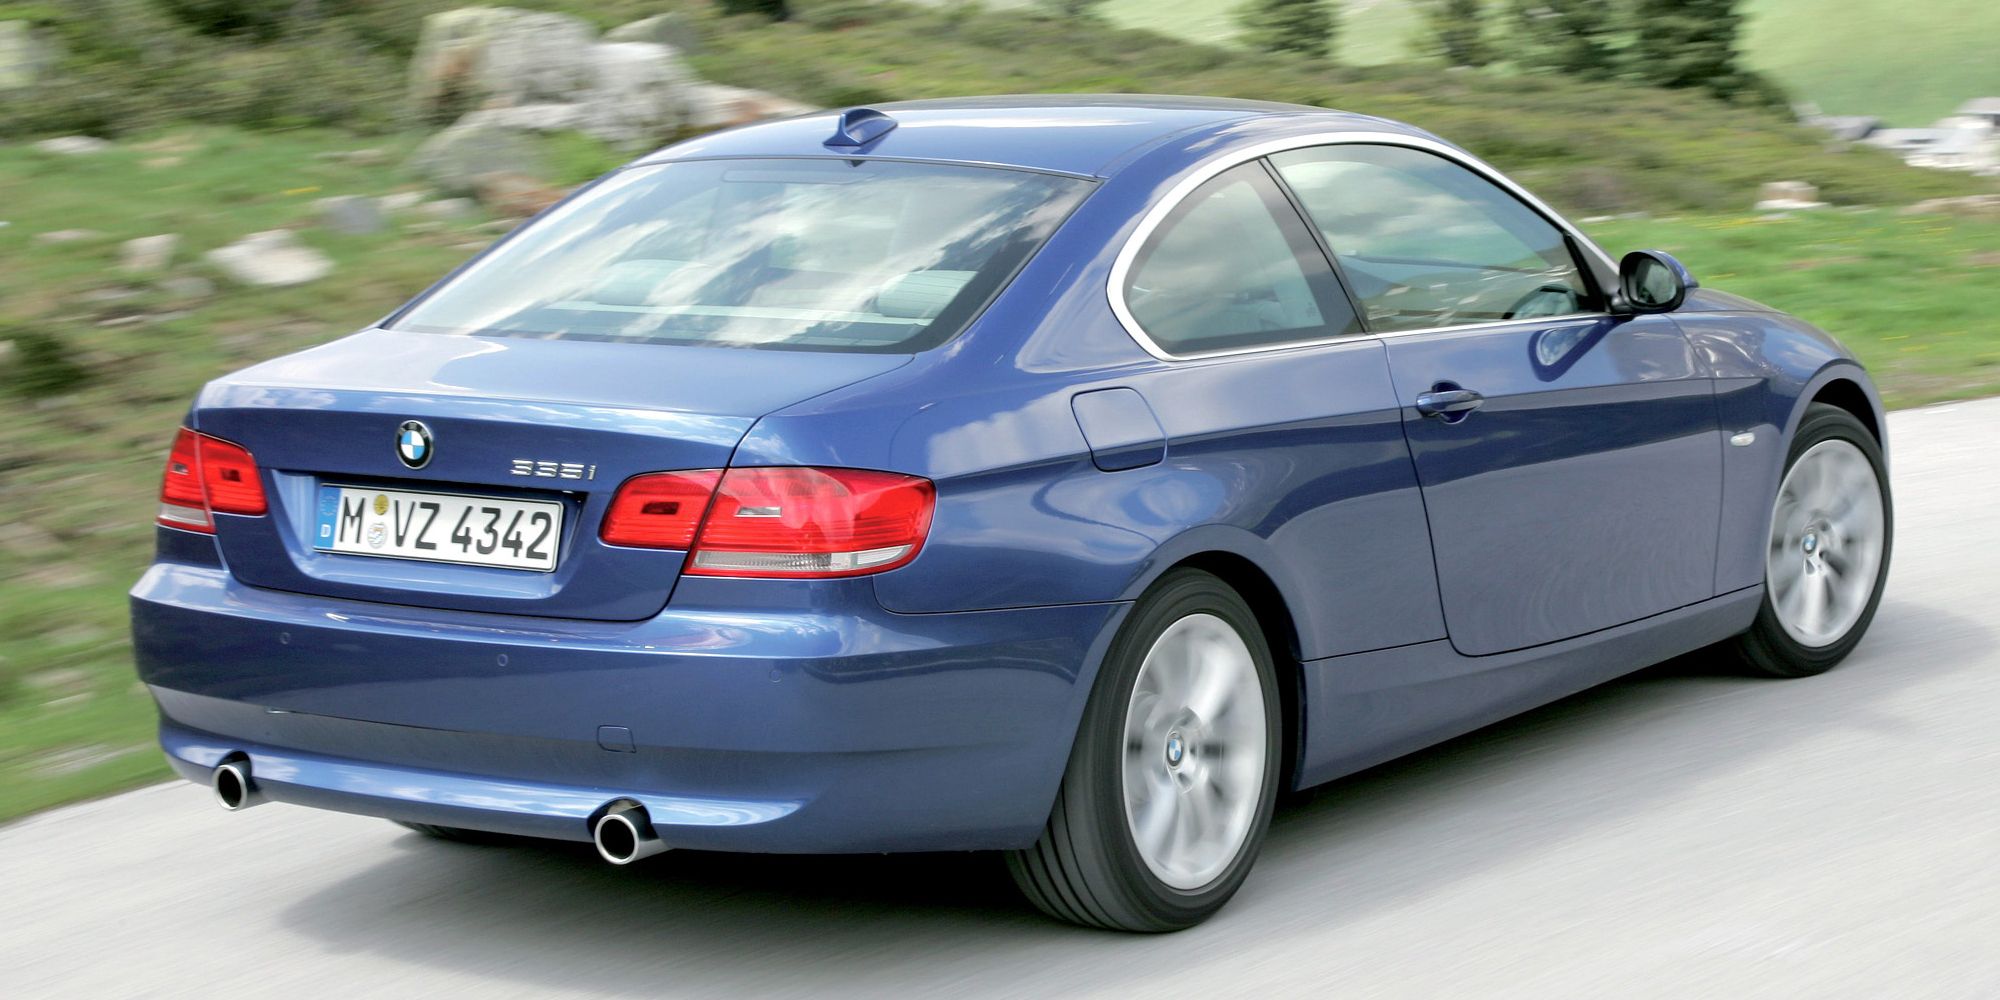 Rear 3/4 view of a blue 335i on the move